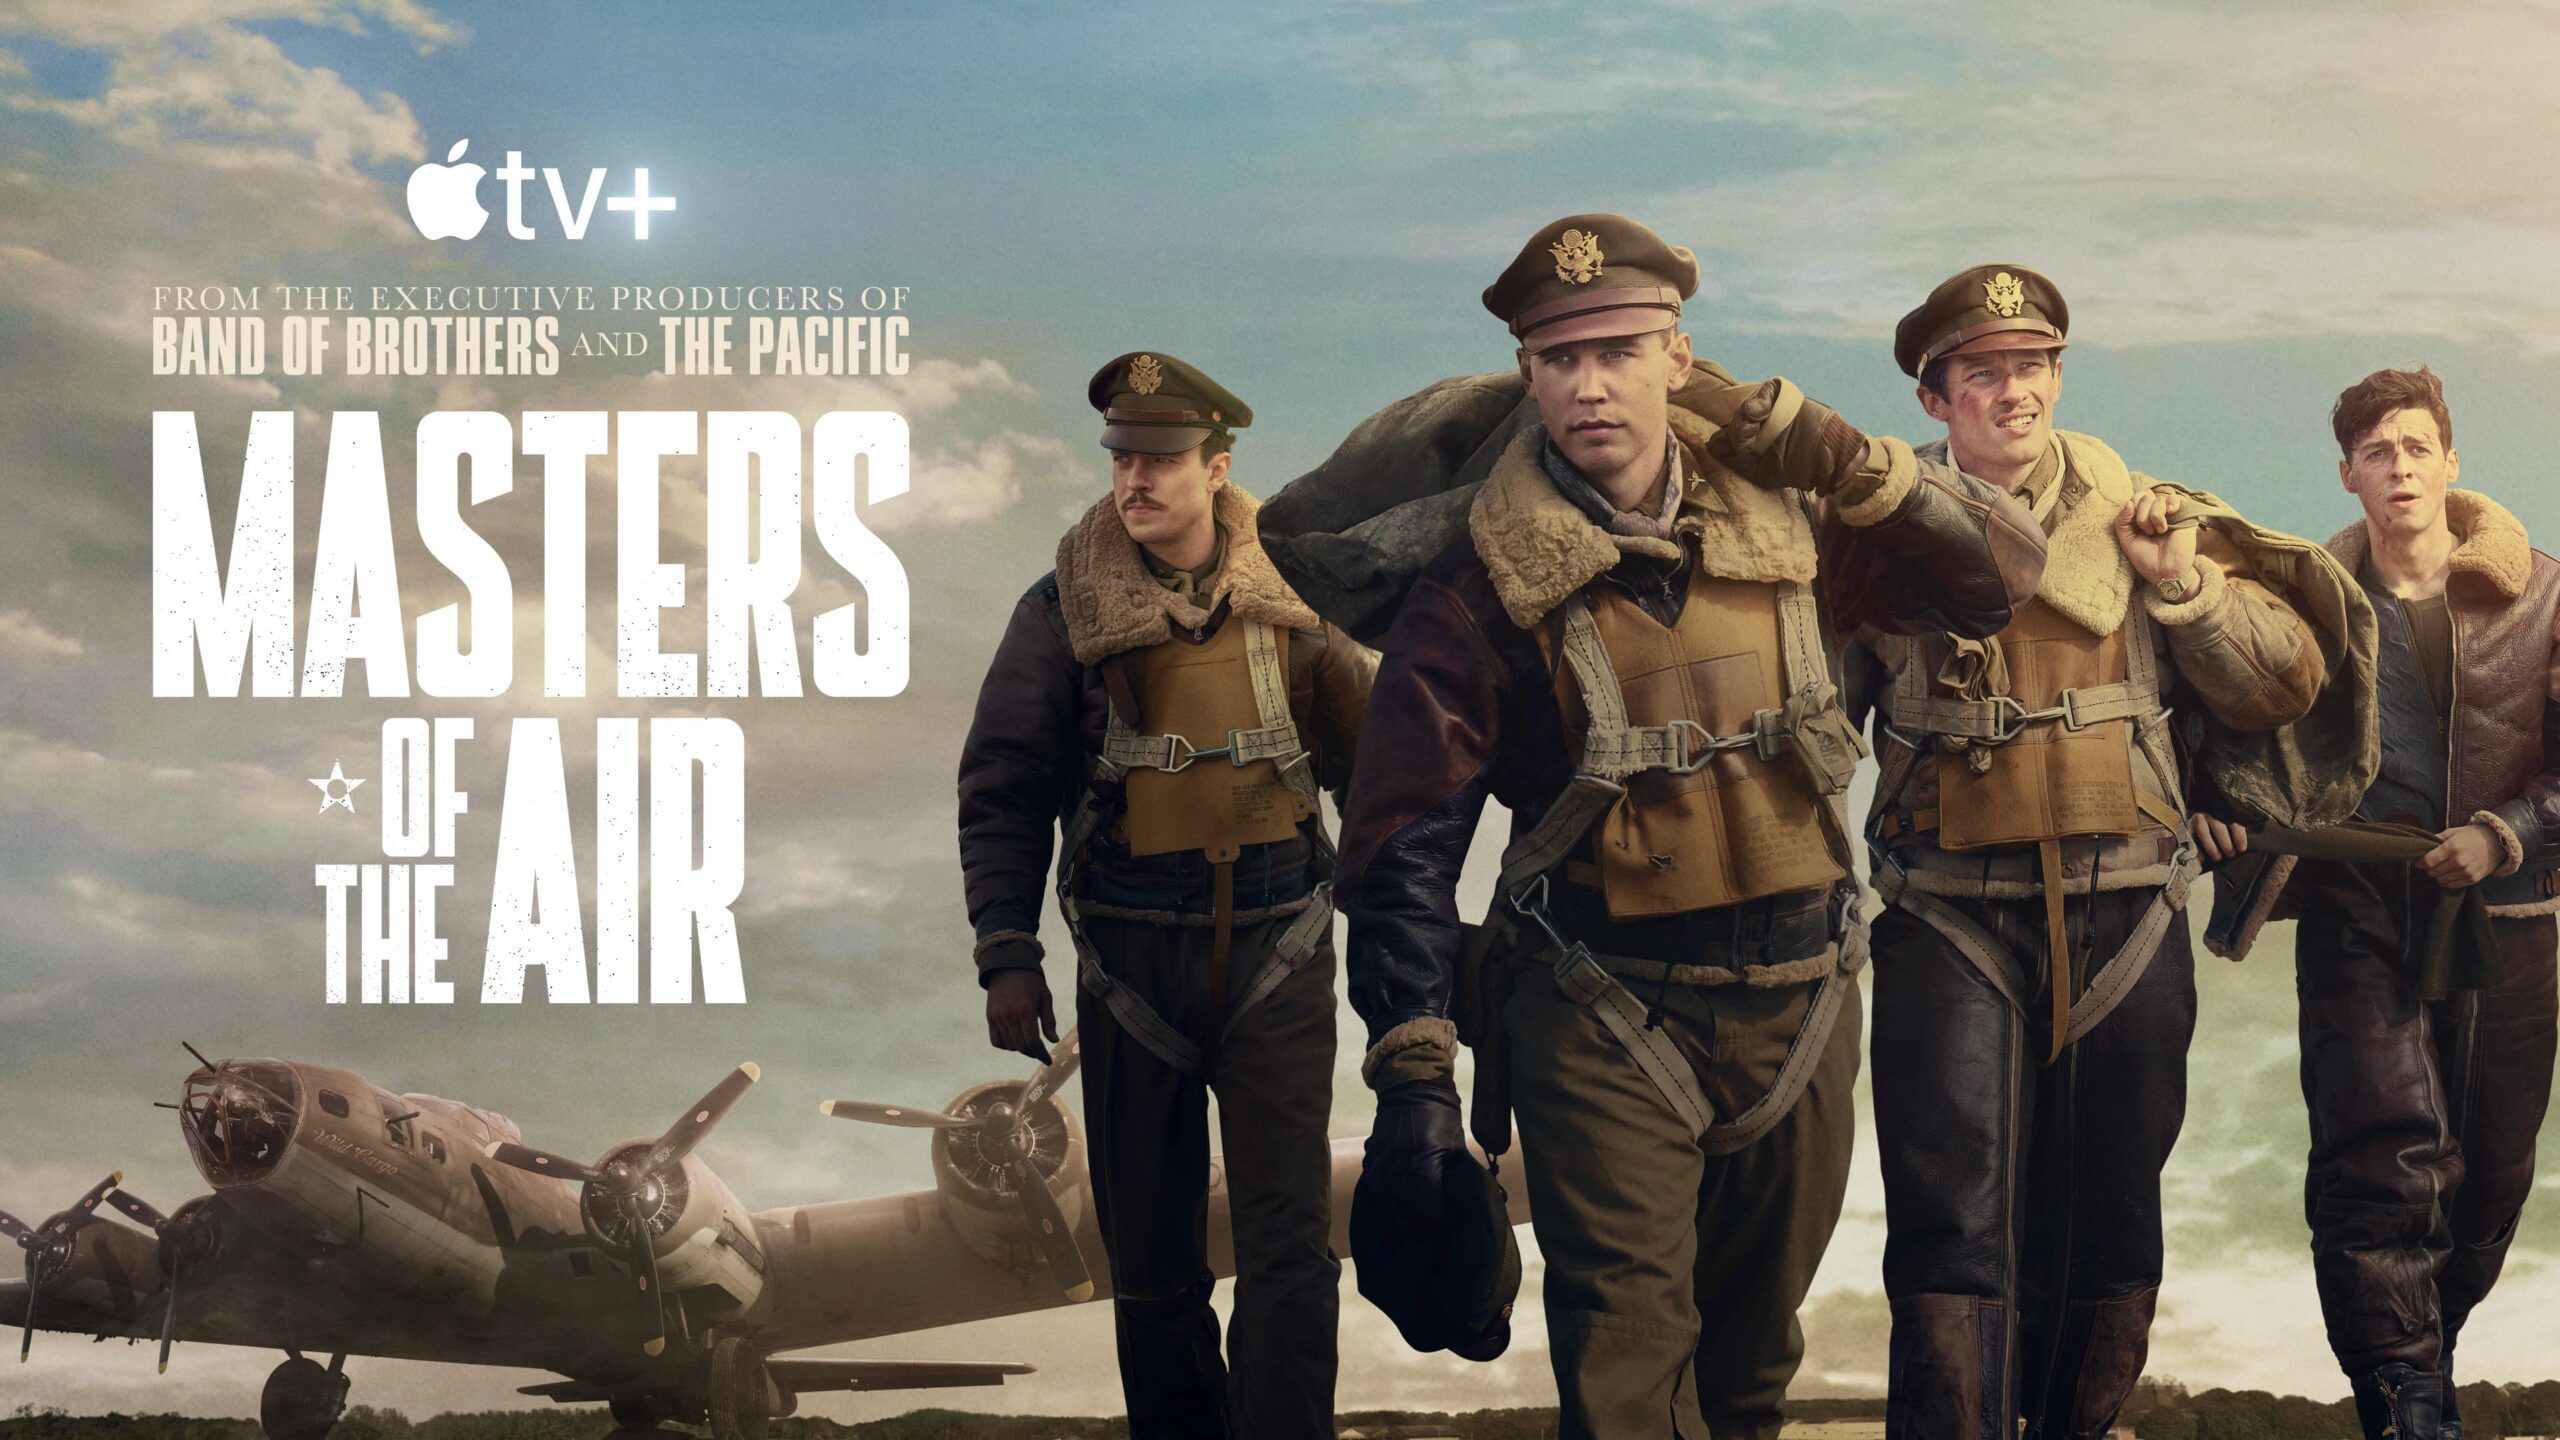 Promotional poster for Masters of the Air featuring four WW2 airmen in front of a bomber plane, with Apple TV+ logo.